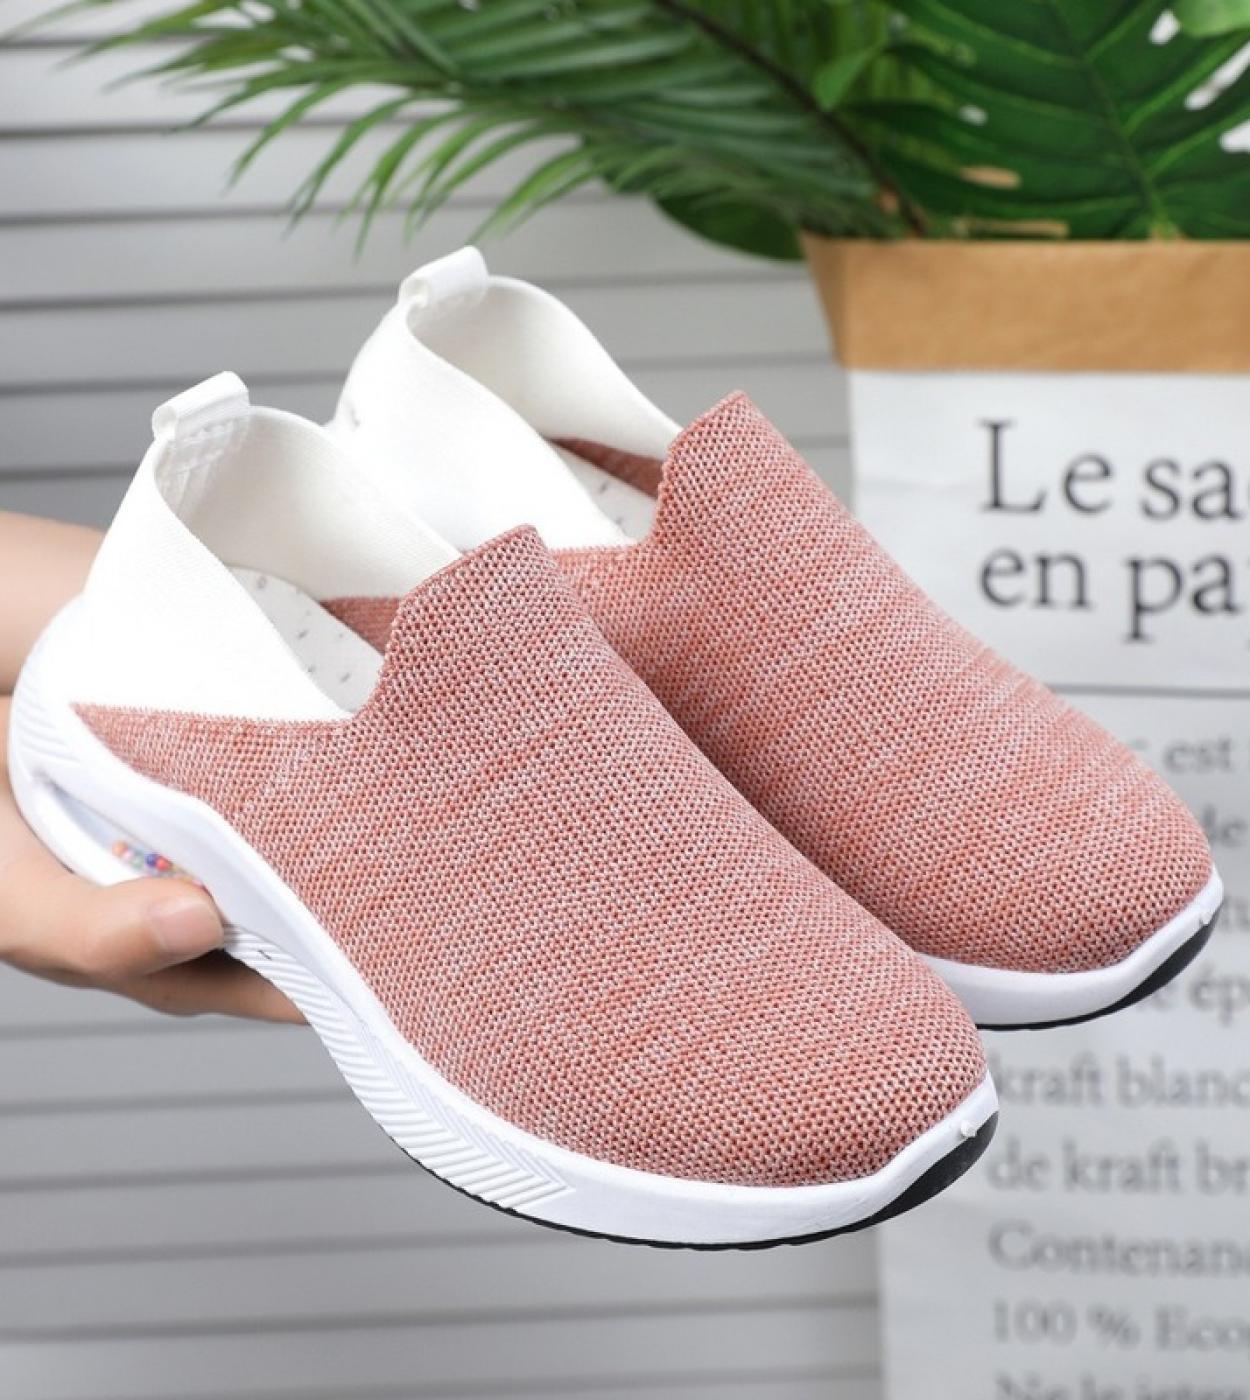 Autumn New Casual Breathable Mesh Rocking Shoes Female Slip On Flat Sneakers Fashion Soft Sole Simple Fly Weave Socks Sh